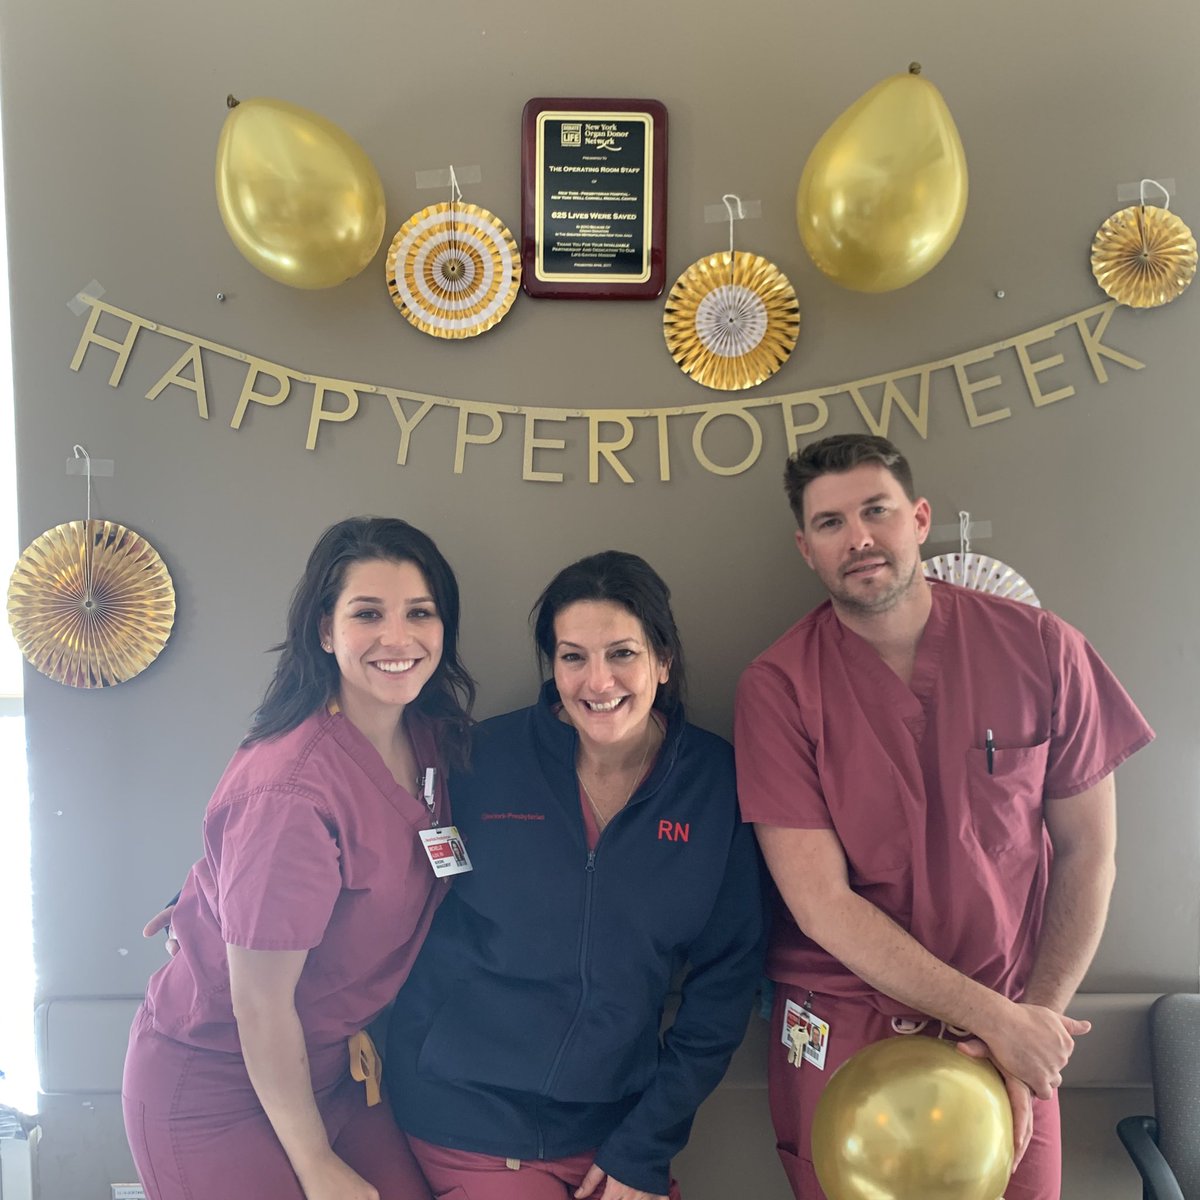 Happy Periop Week! I’m proud to work with such a great group! #nyp #engaged #g3or #periopnursesweek #nypcornell #nypproud